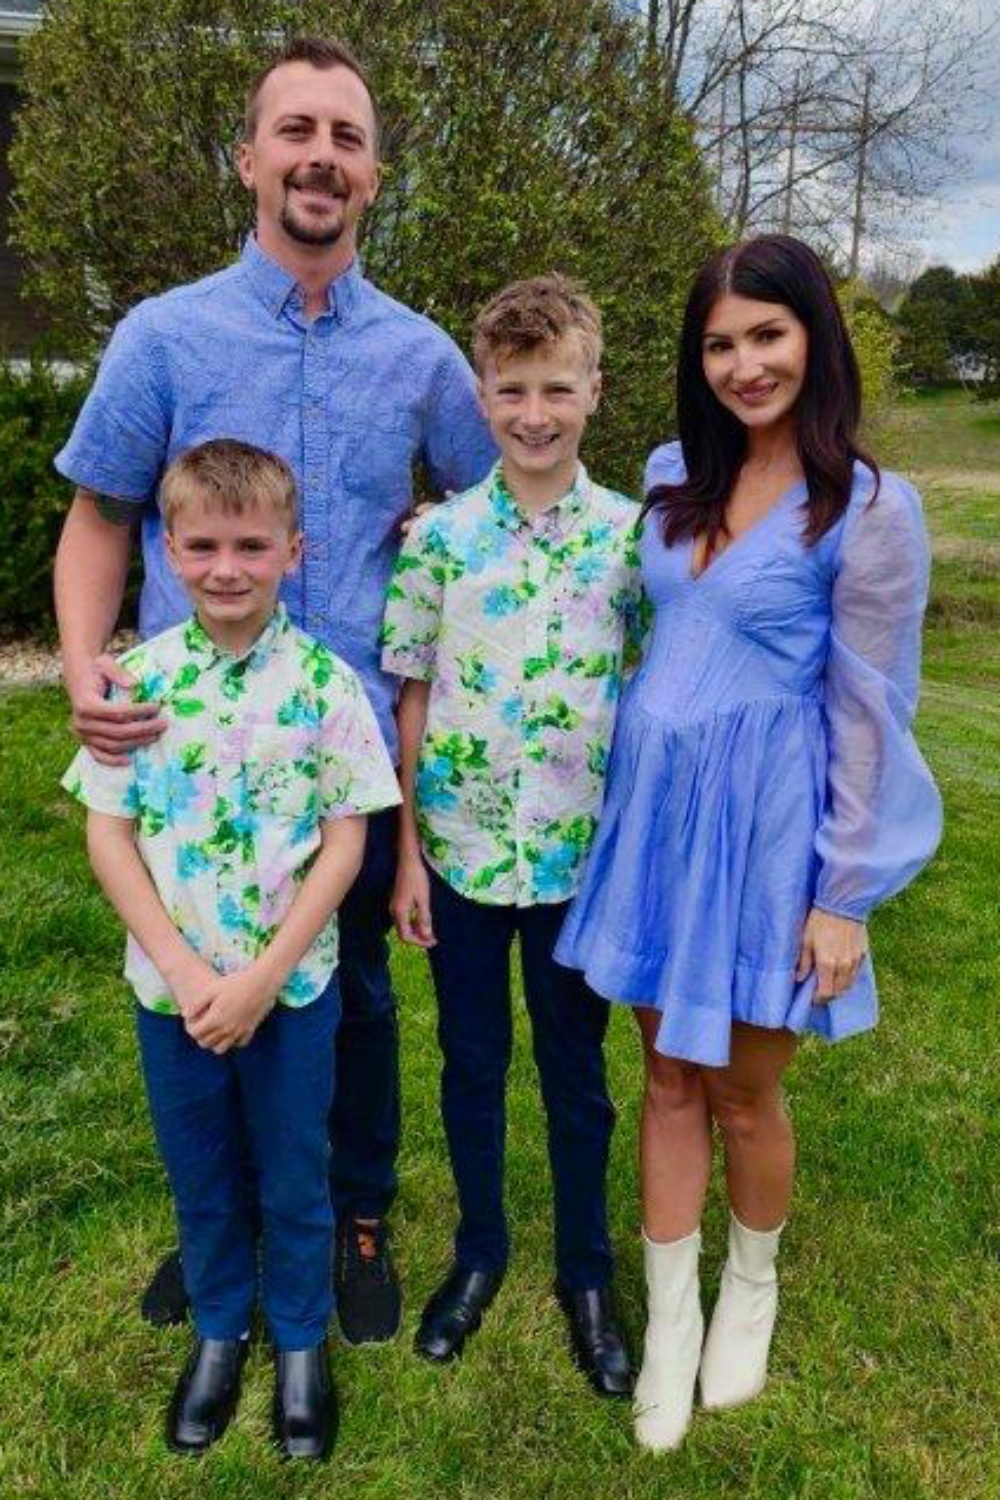 Chris Evans and his wife Katya pose for a picture with their two sons, ages 13 and 9